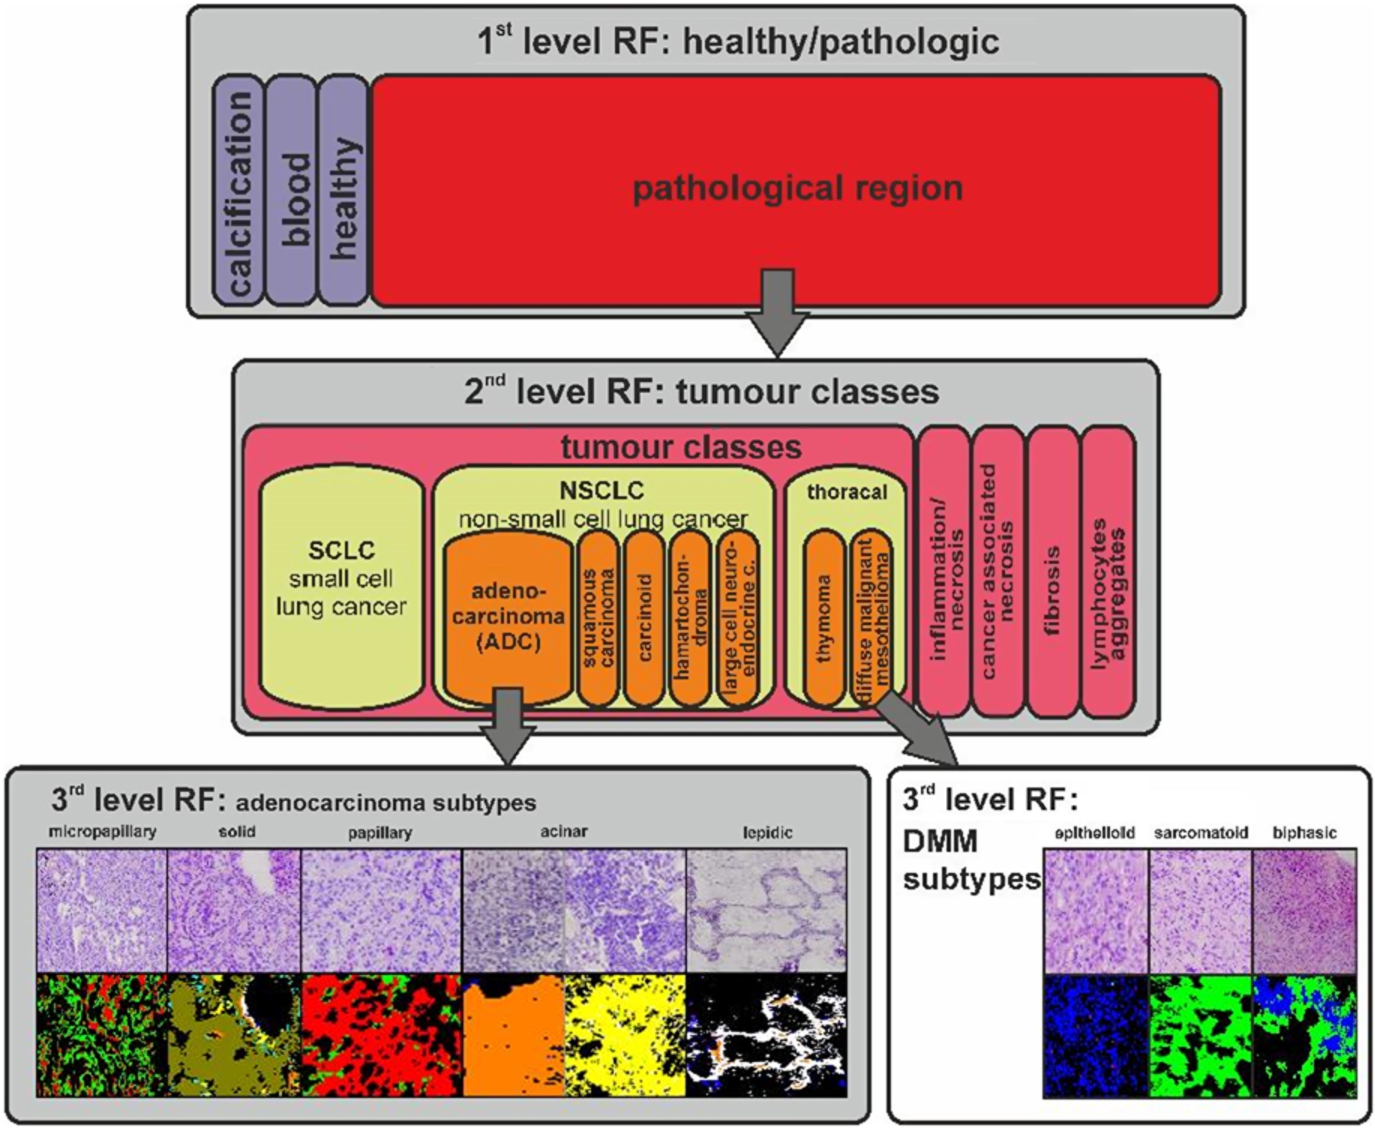 Schematic workflow of the differential FTIR imaging tissue characterization for thoracal tumours. Tissue annotation by FTIR imaging for lung tumours and thoracal tumours is illustrated. In a first classifier, the pathologic regions were identified. In a second classifier, the different tumour classes of the pathologic region are differentiated. Finally, in the third classifier, a differential diagnosis of the tumour subtypes is provided. The classifiers for lung tumours and thoracal tumours (shaded in grey) were previously published by Großerueschkamp, Kallenbach-Thieltges et al. [10]. The classification of DMM subtypes was previously published by Großerueschkamp et al. [9]. The proof that differential diagnostic is possible with IR imaging was an important step for the label-free digital pathology.